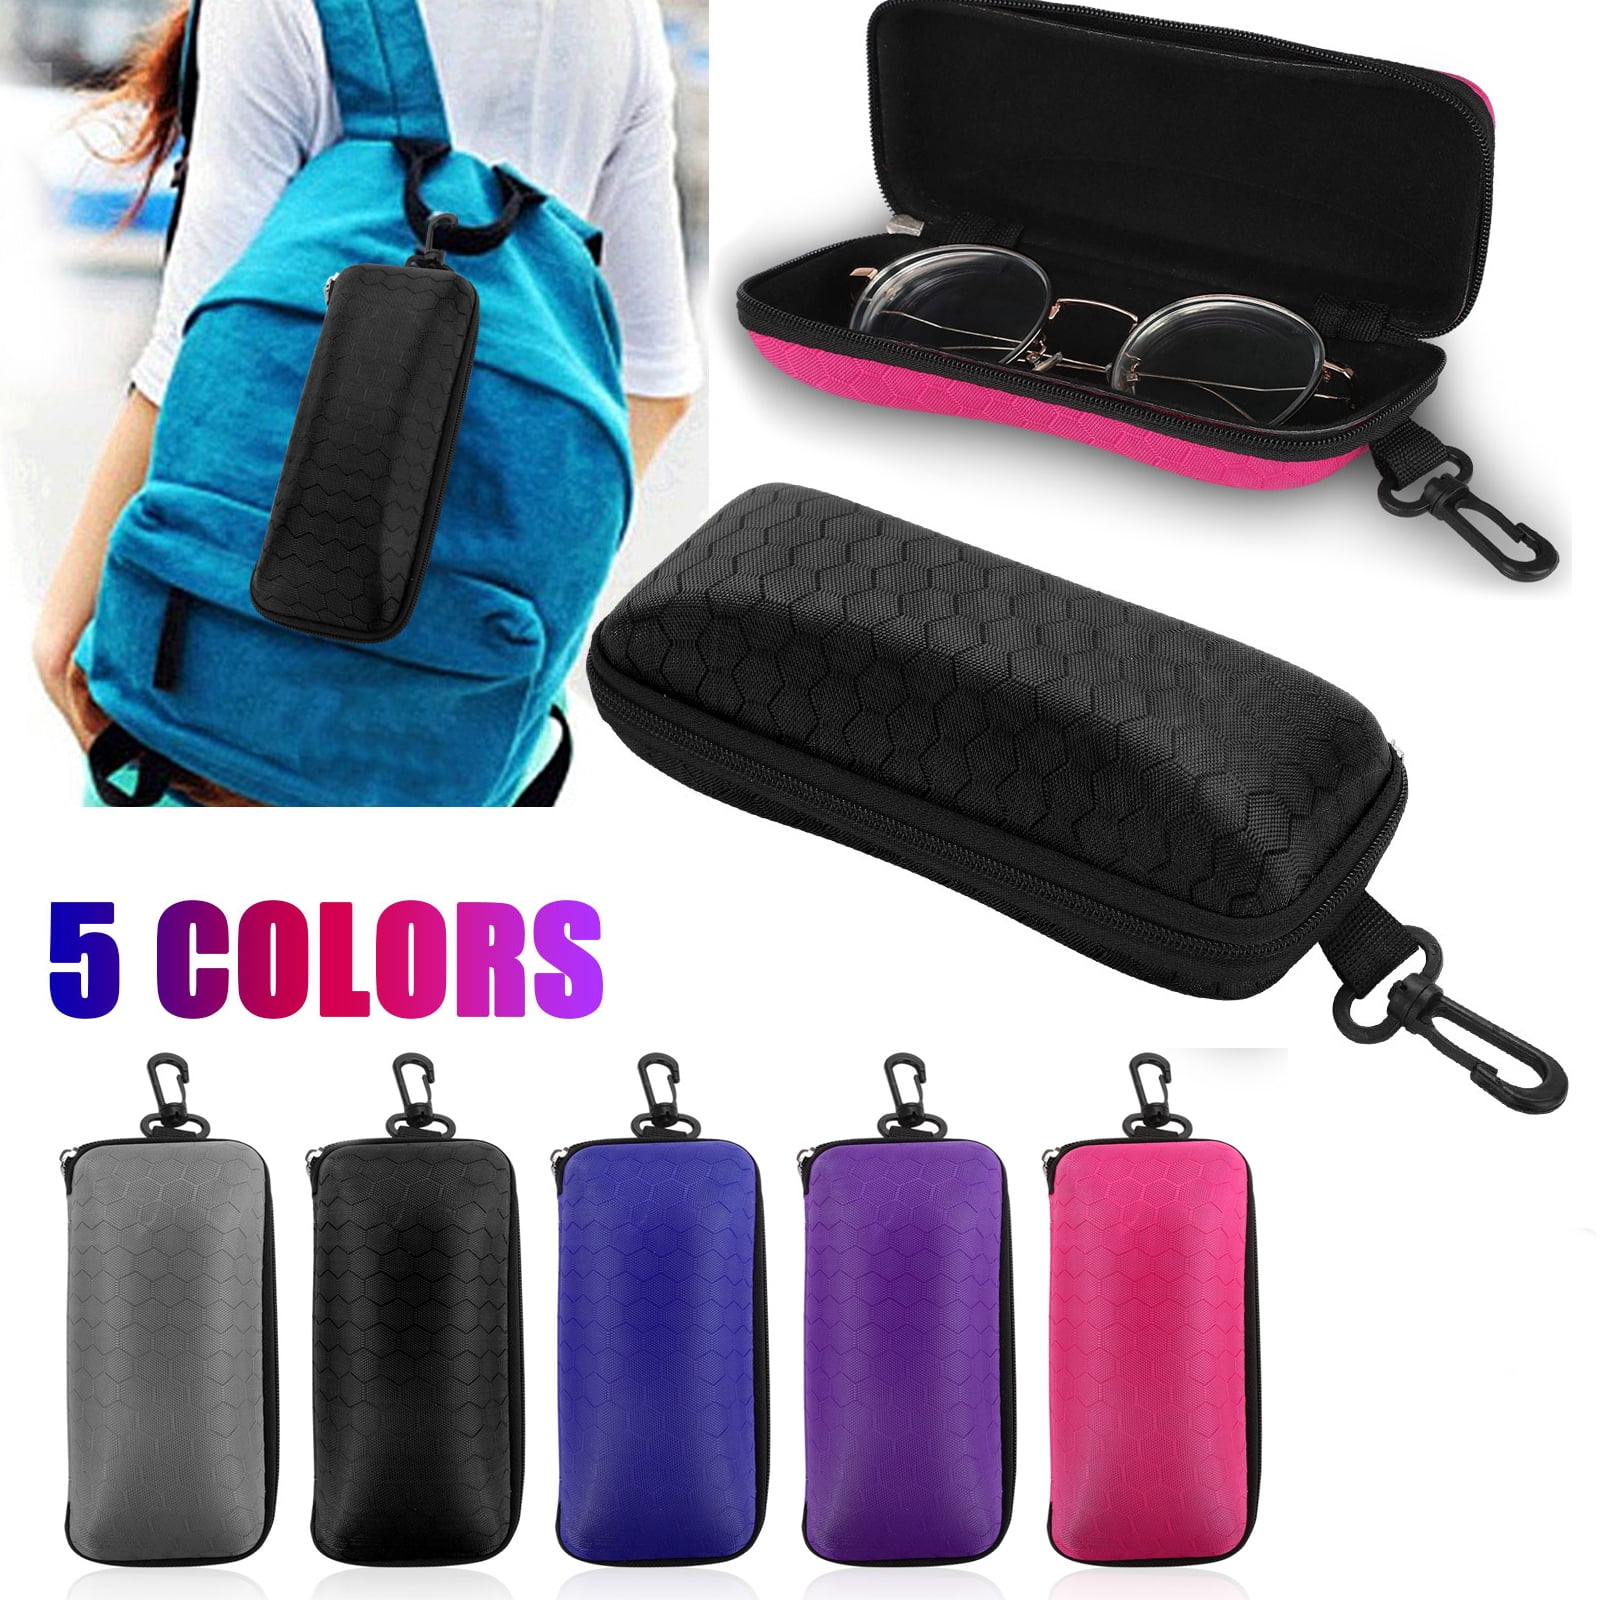 Swimming Glasses and Eyeglasses Wanty Portable Travel Zipper Soft Neoprene Safety Pouch Box Case for Sunglasses 